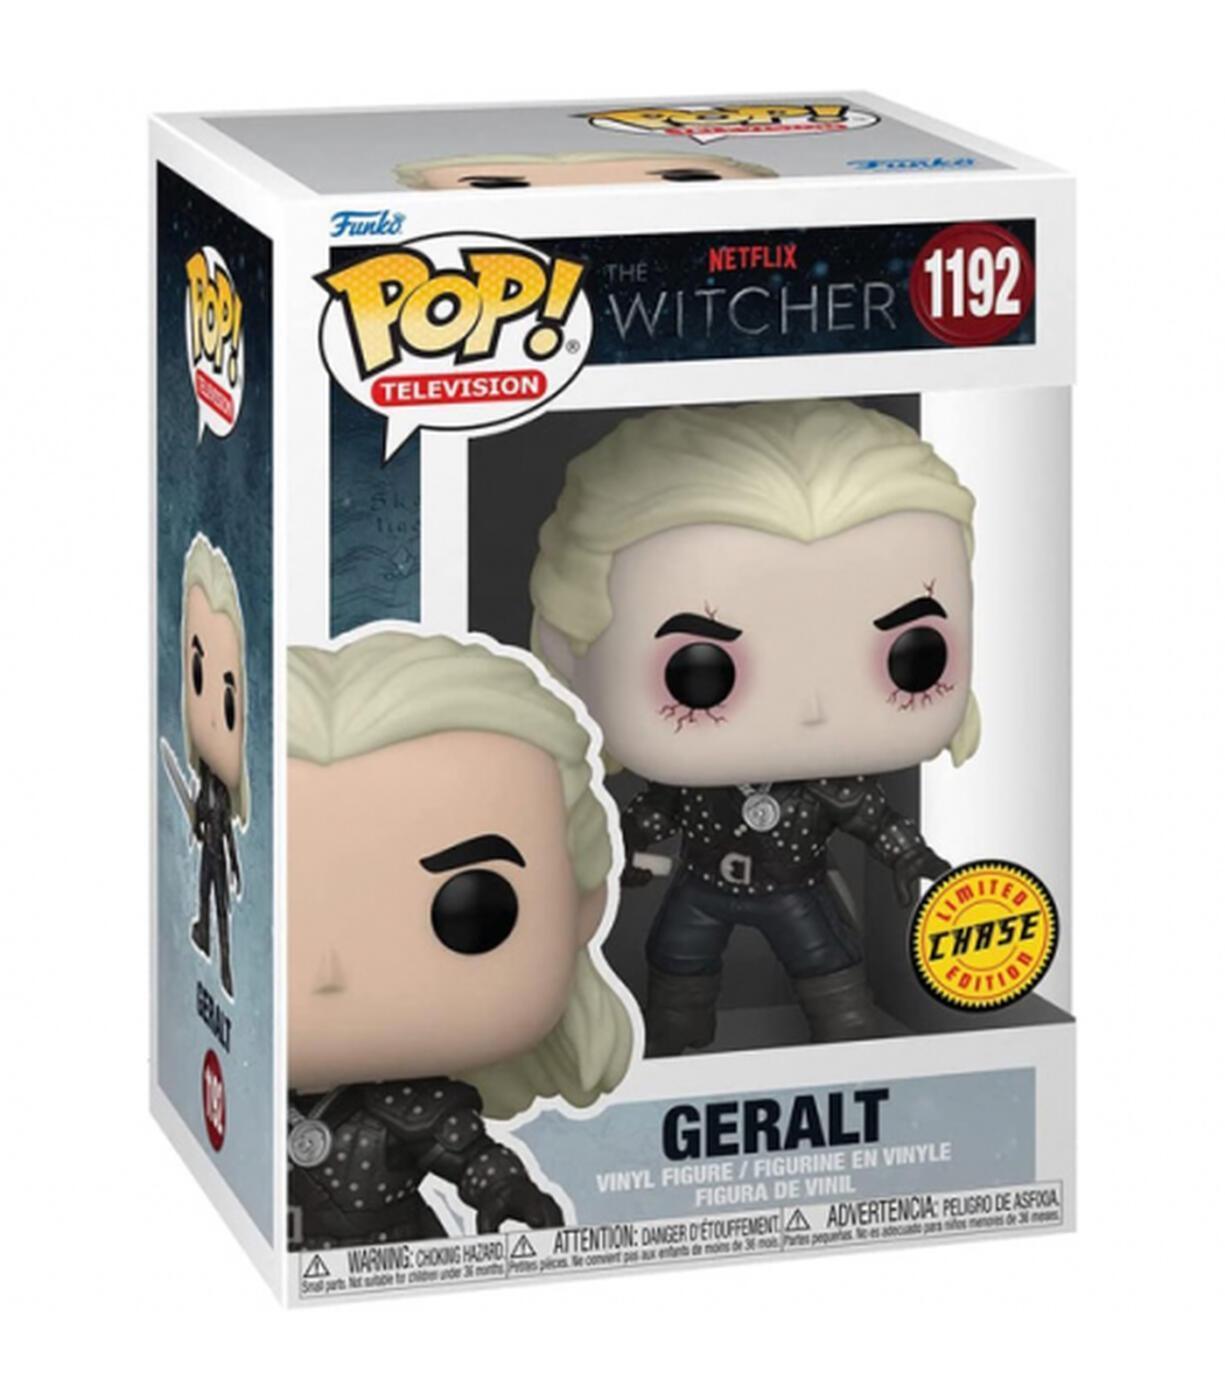 The Witcher: Funko Pop! Television - Geralt #1192T CHASE - Magic Dreams Store